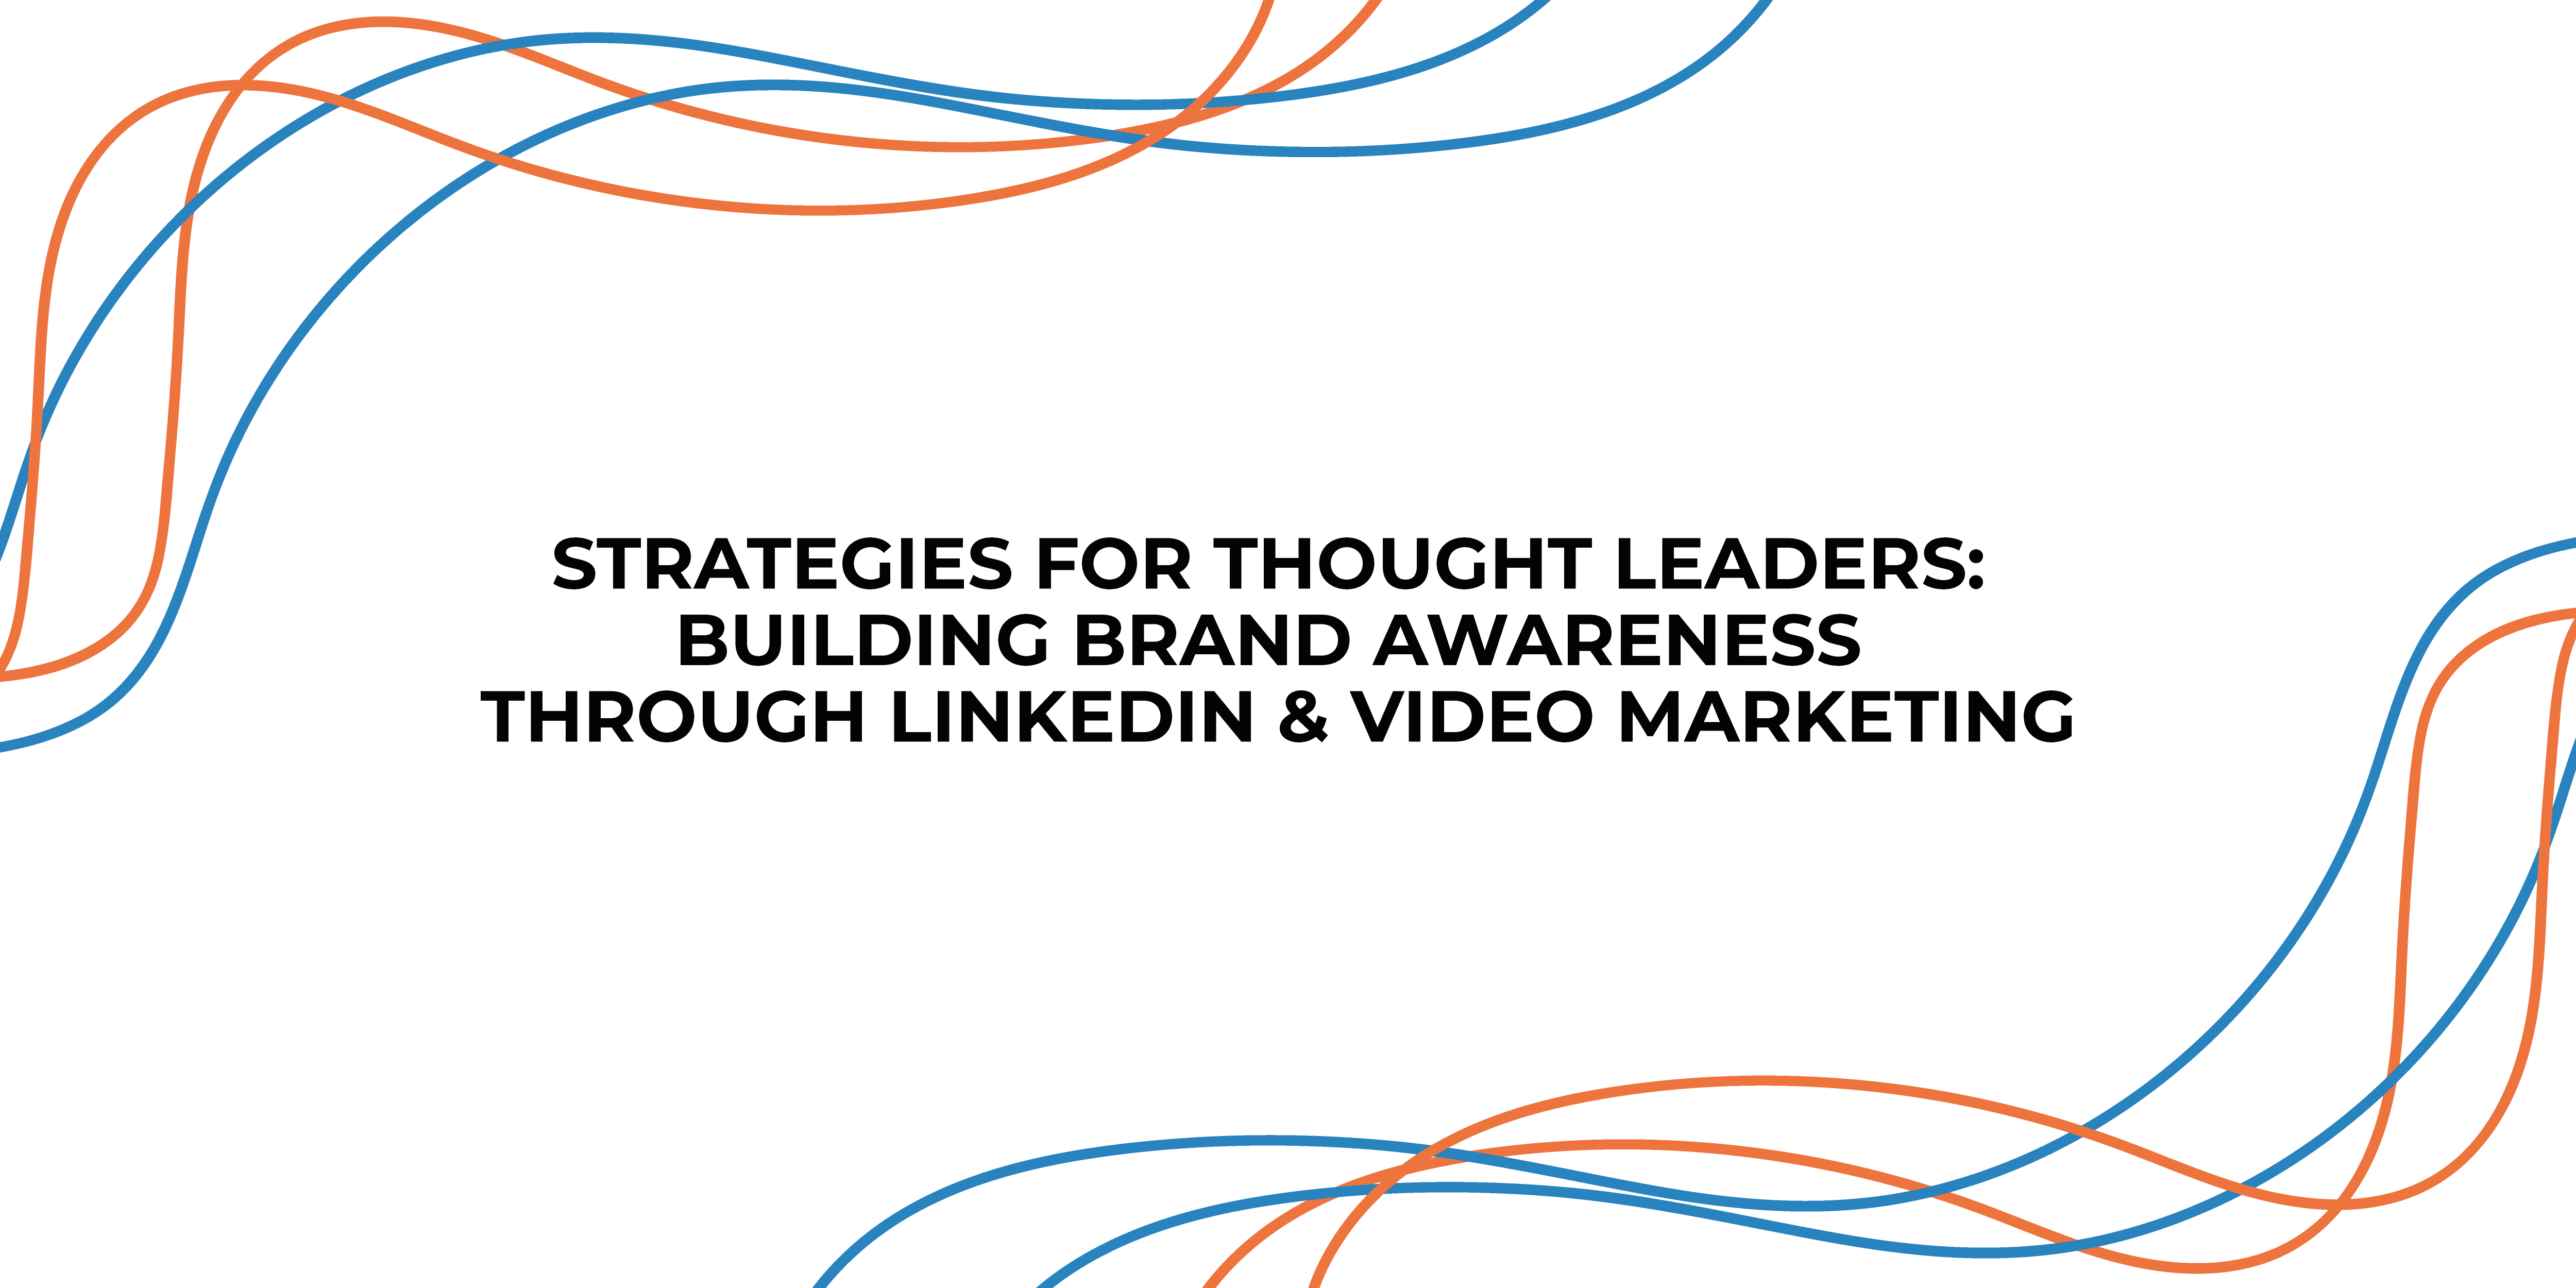 Strategies for Thought Leaders: Building Brand Awareness through LinkedIn & Video Marketing